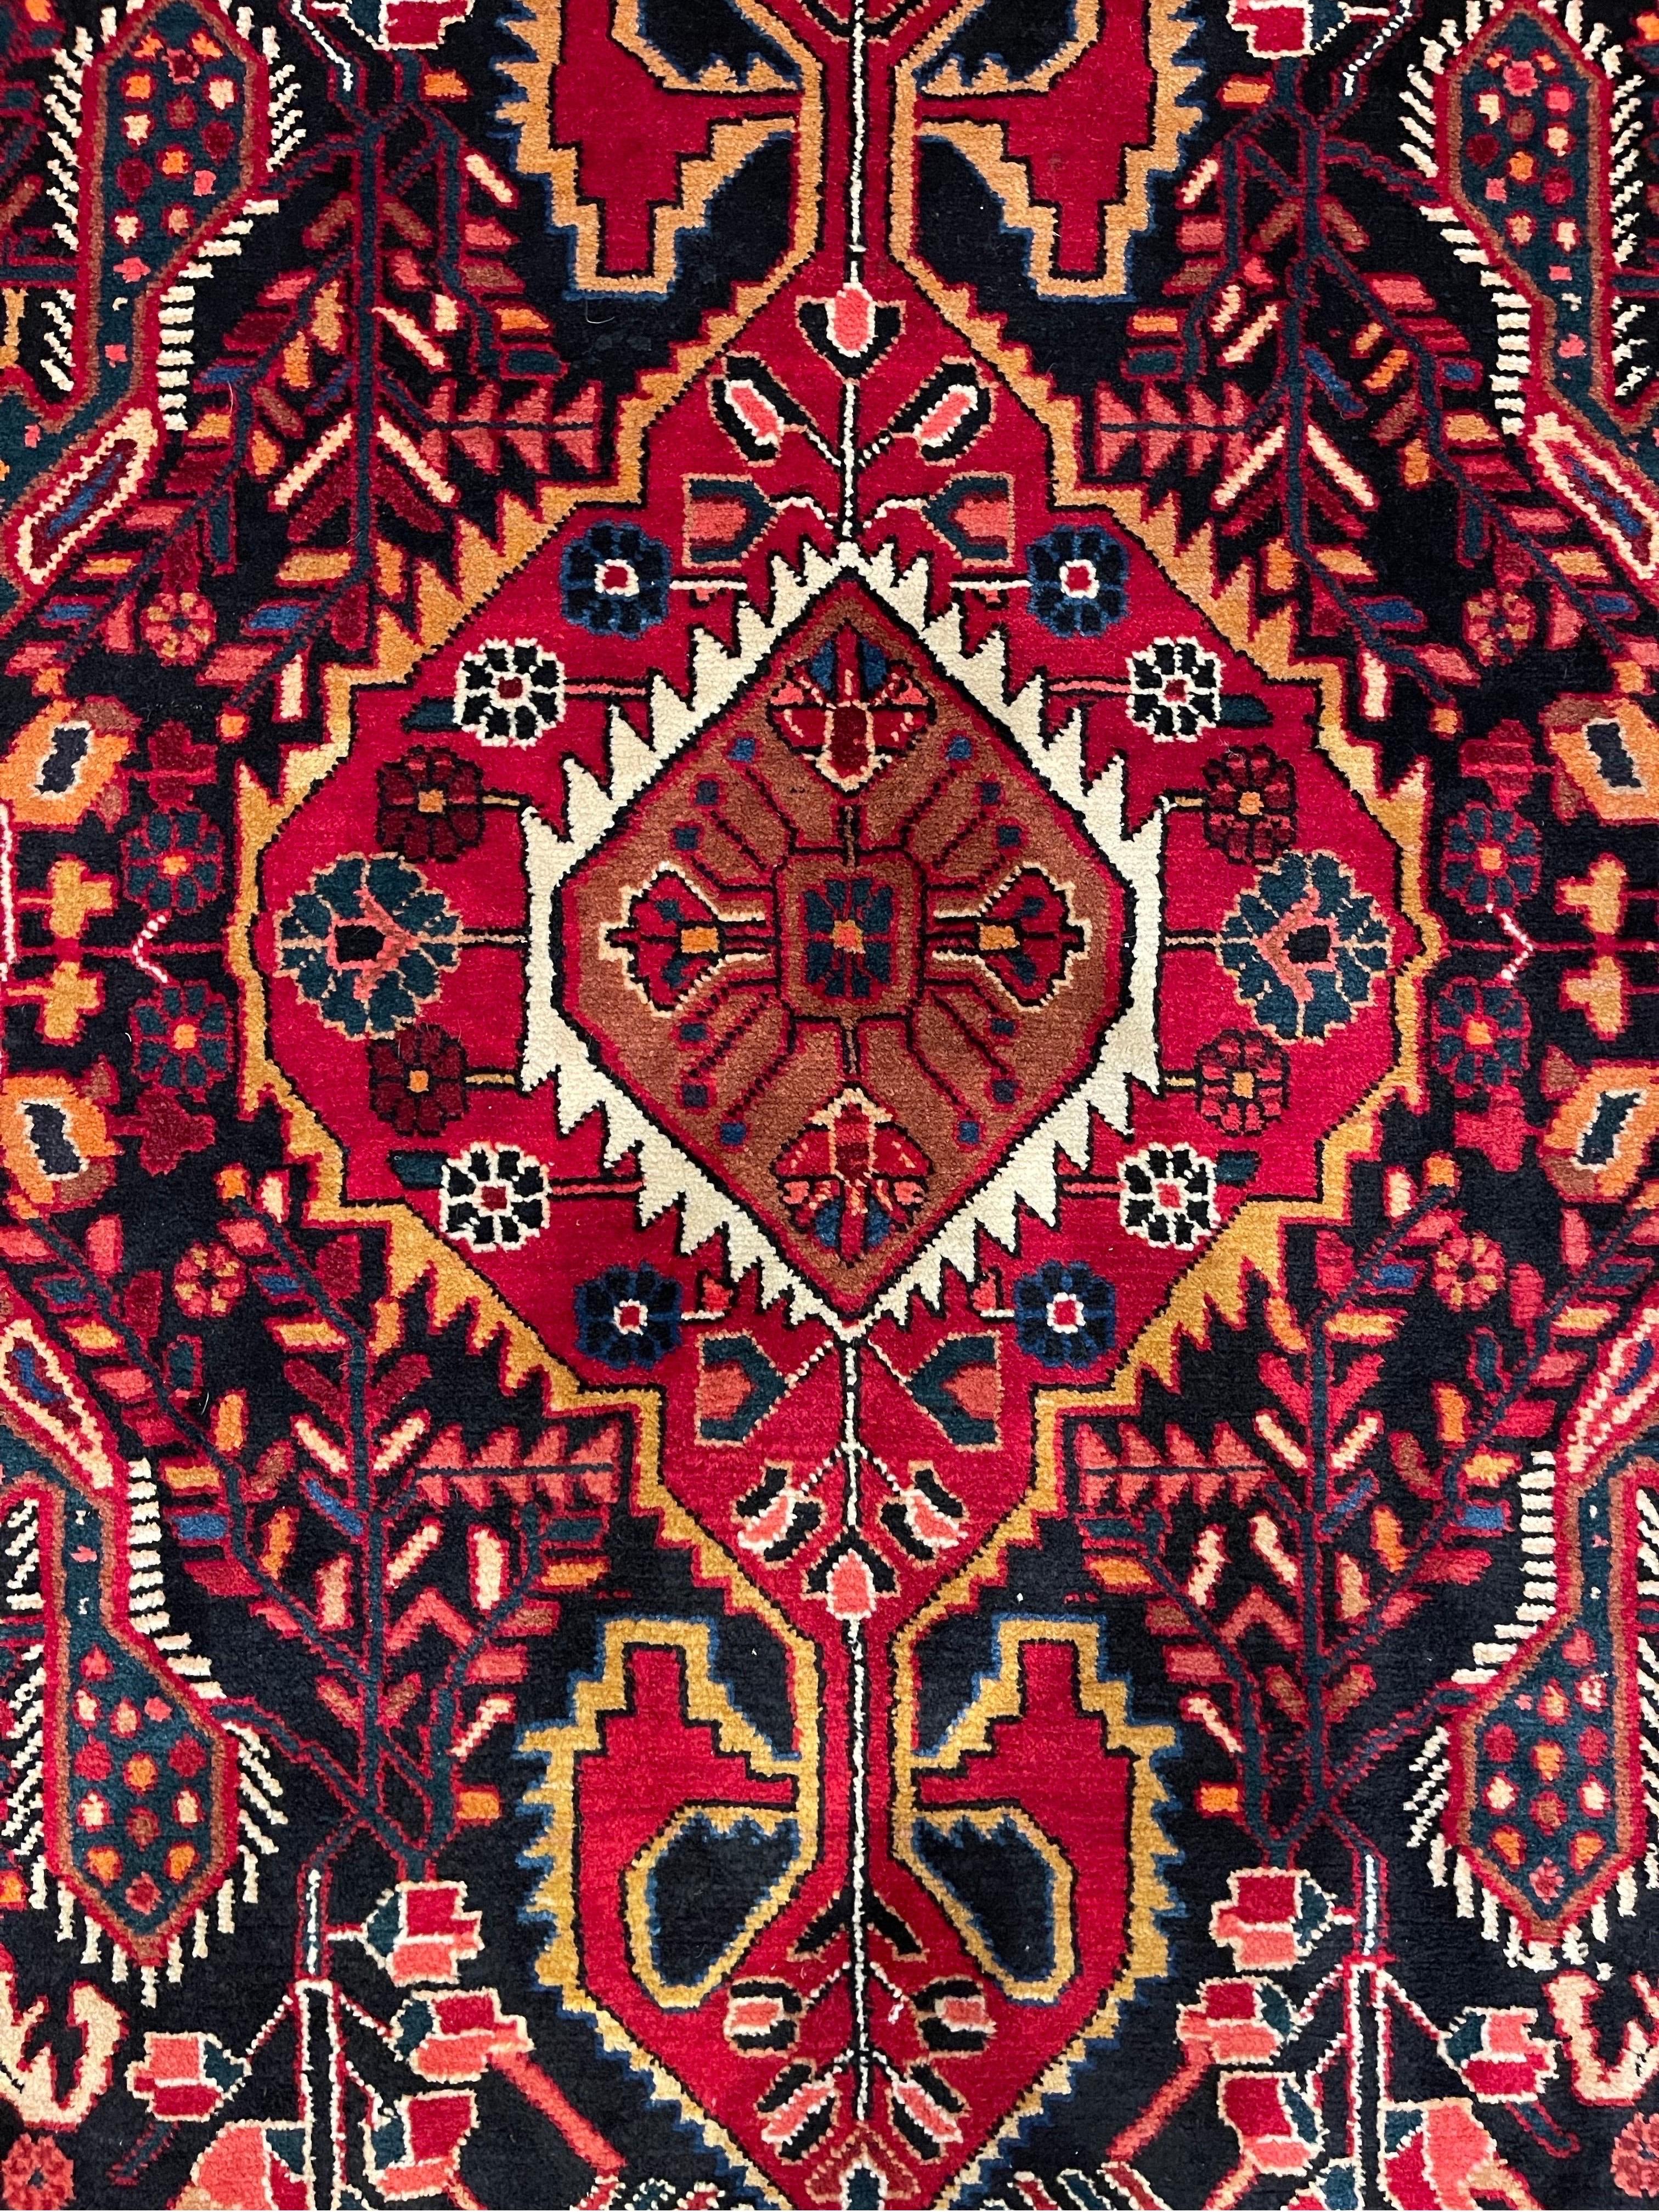 Bakhtiari rugs are known for being the brightest and most colorful of all nomadic rugs. Bakhtiari rugs are hand woven by the Bakhtiari tribe, one of the oldest and most well-known Persian rug industry.  This Piece has a geometric design with